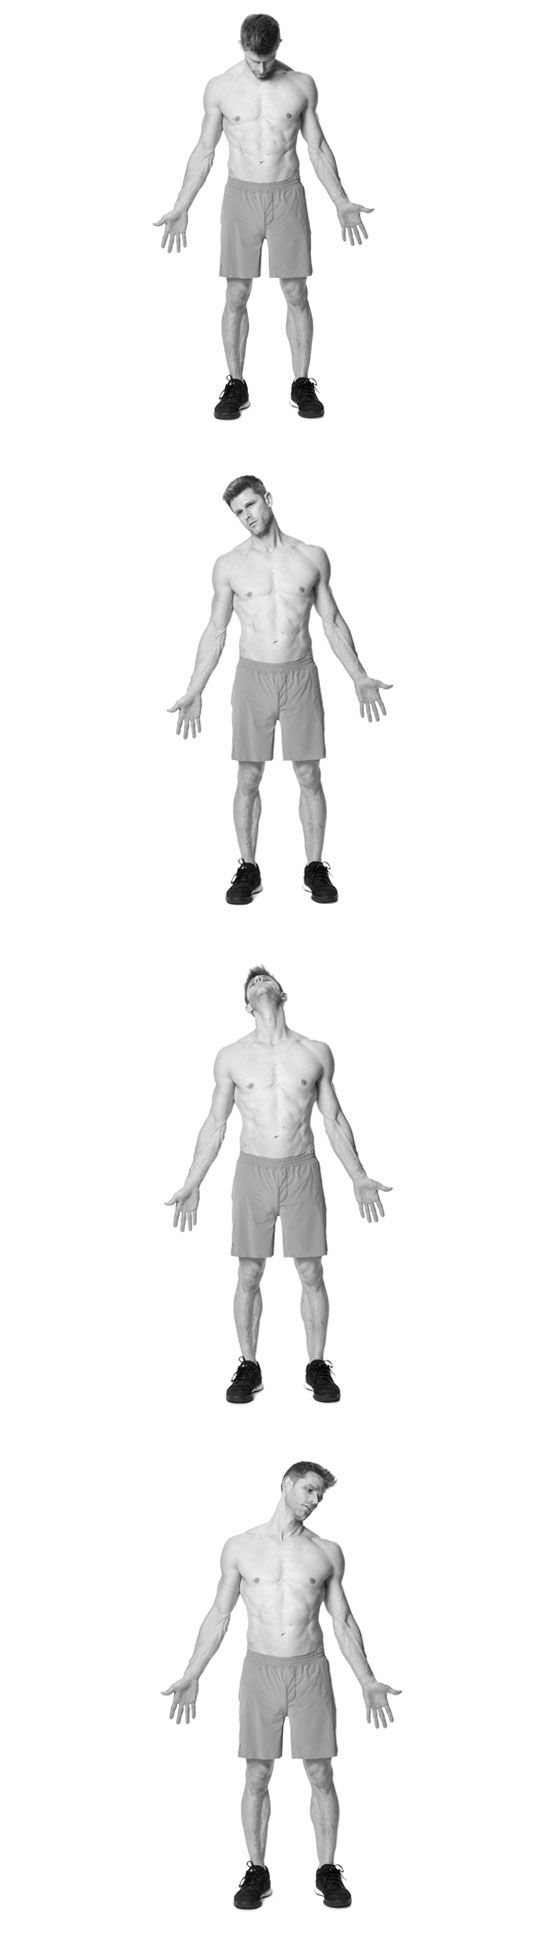 Standing, Illustration, Arm, Leg, Human, Black-and-white, Muscle, Sketch, Drawing, Animation, 